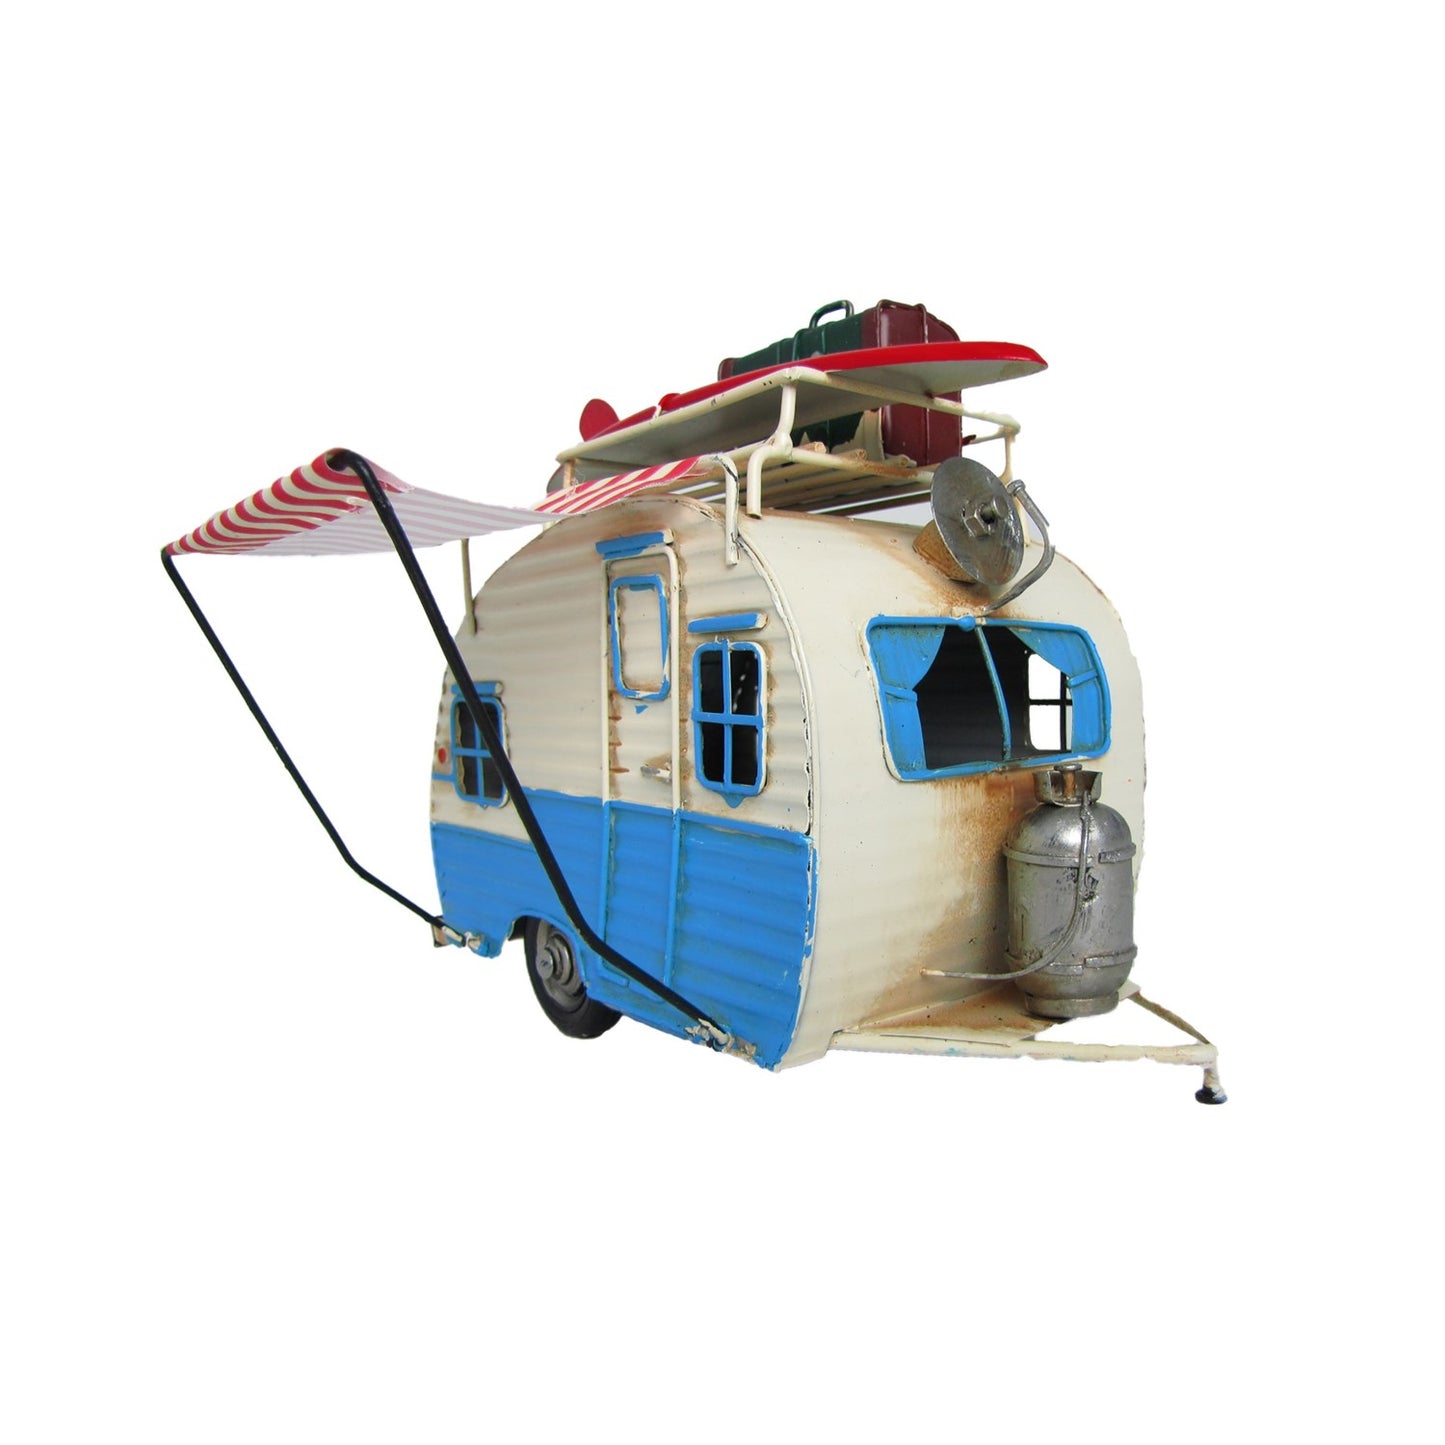 California Camper with Surfboard Decoration